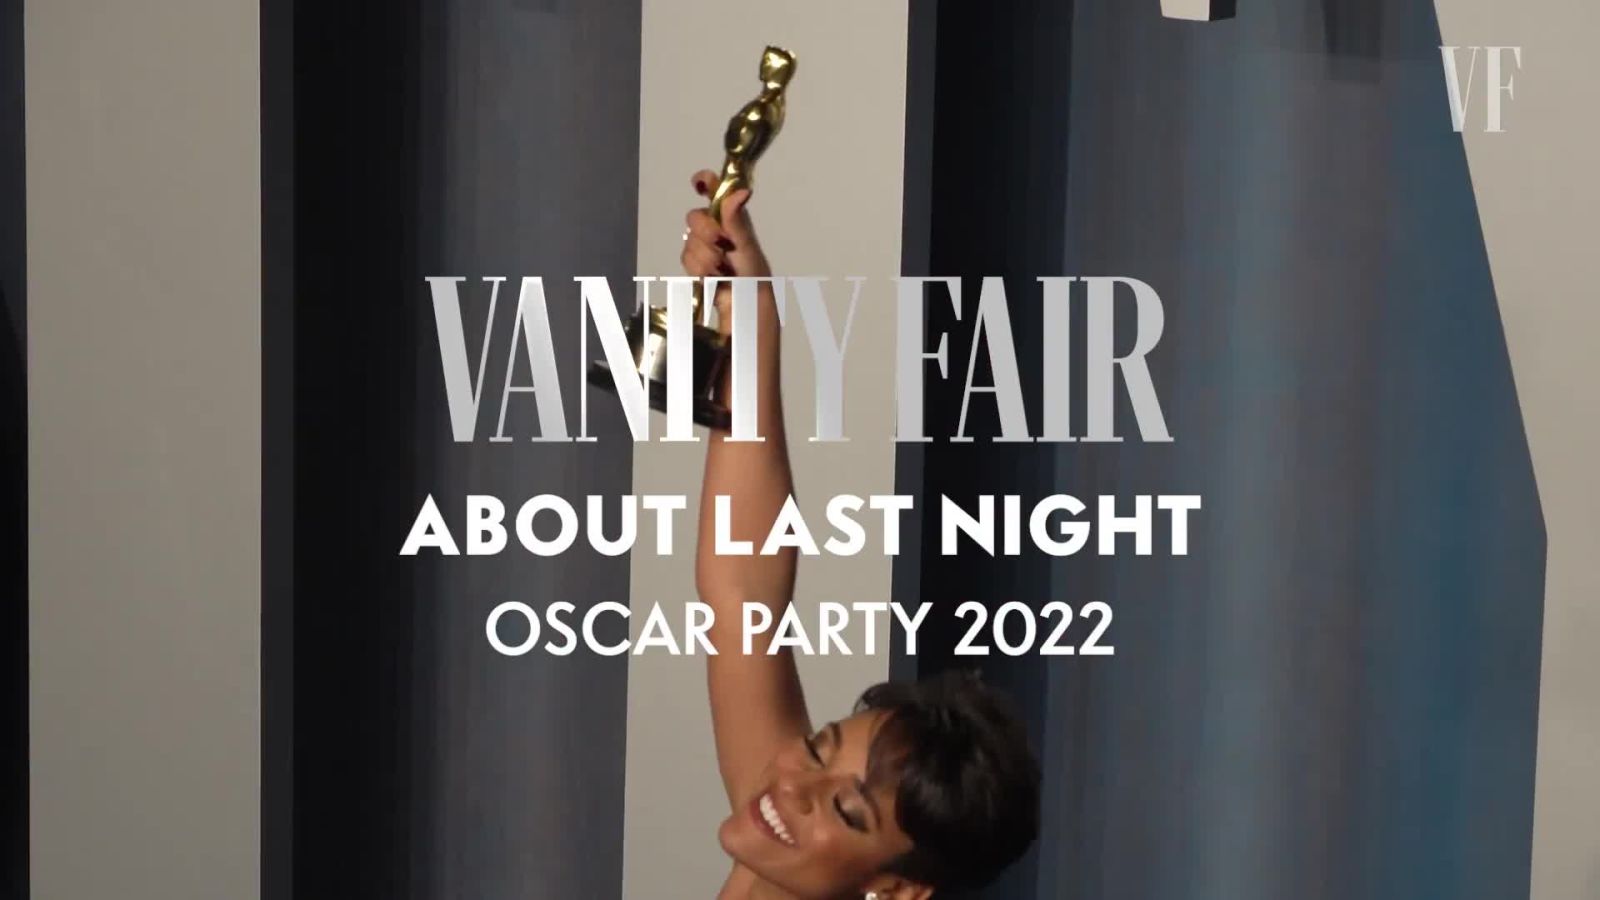 Watch all the highlights from the Oscars 2022 Vanity Fair party with British GQ